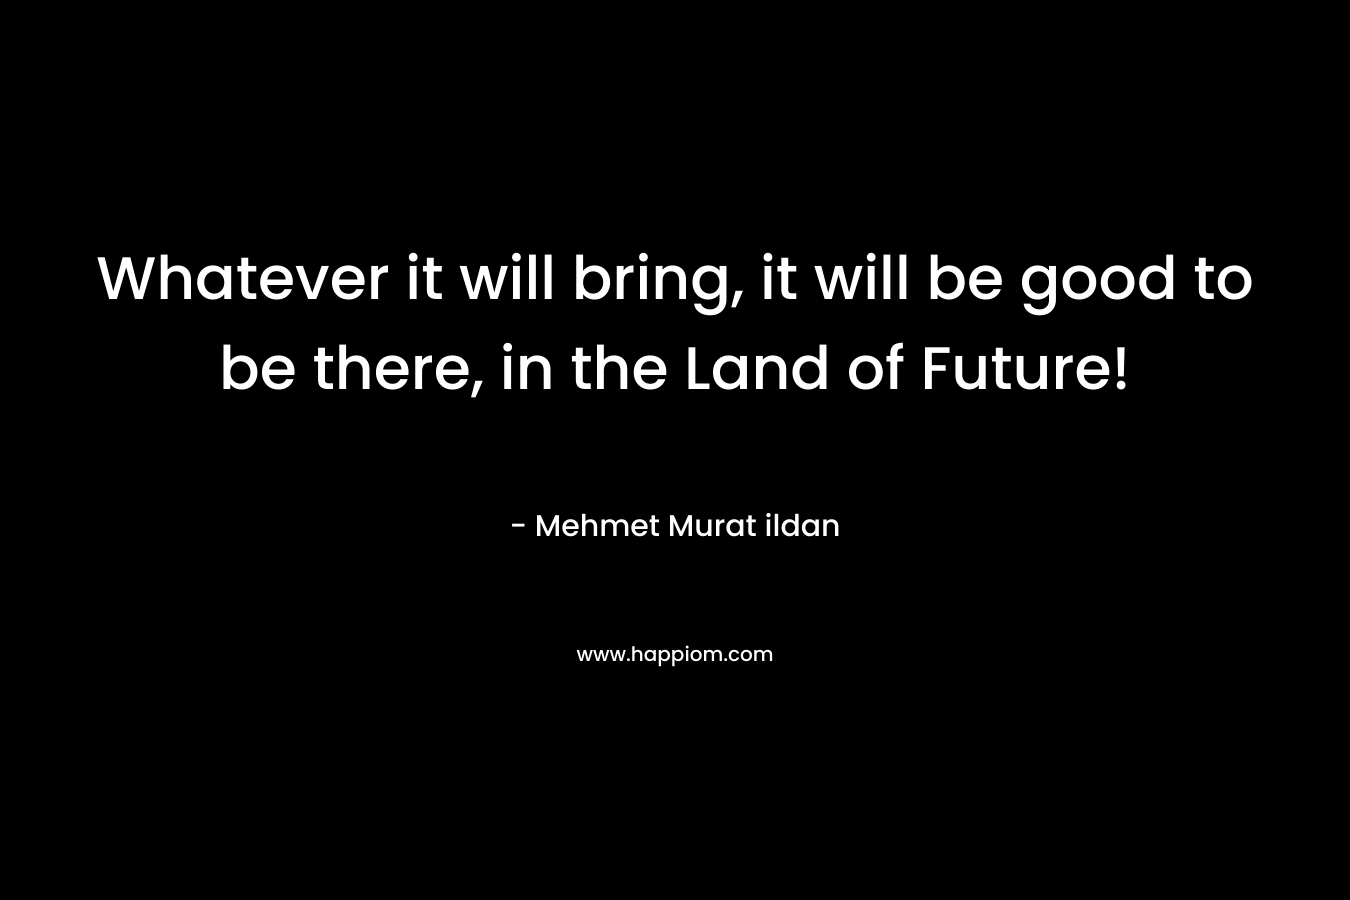 Whatever it will bring, it will be good to be there, in the Land of Future!